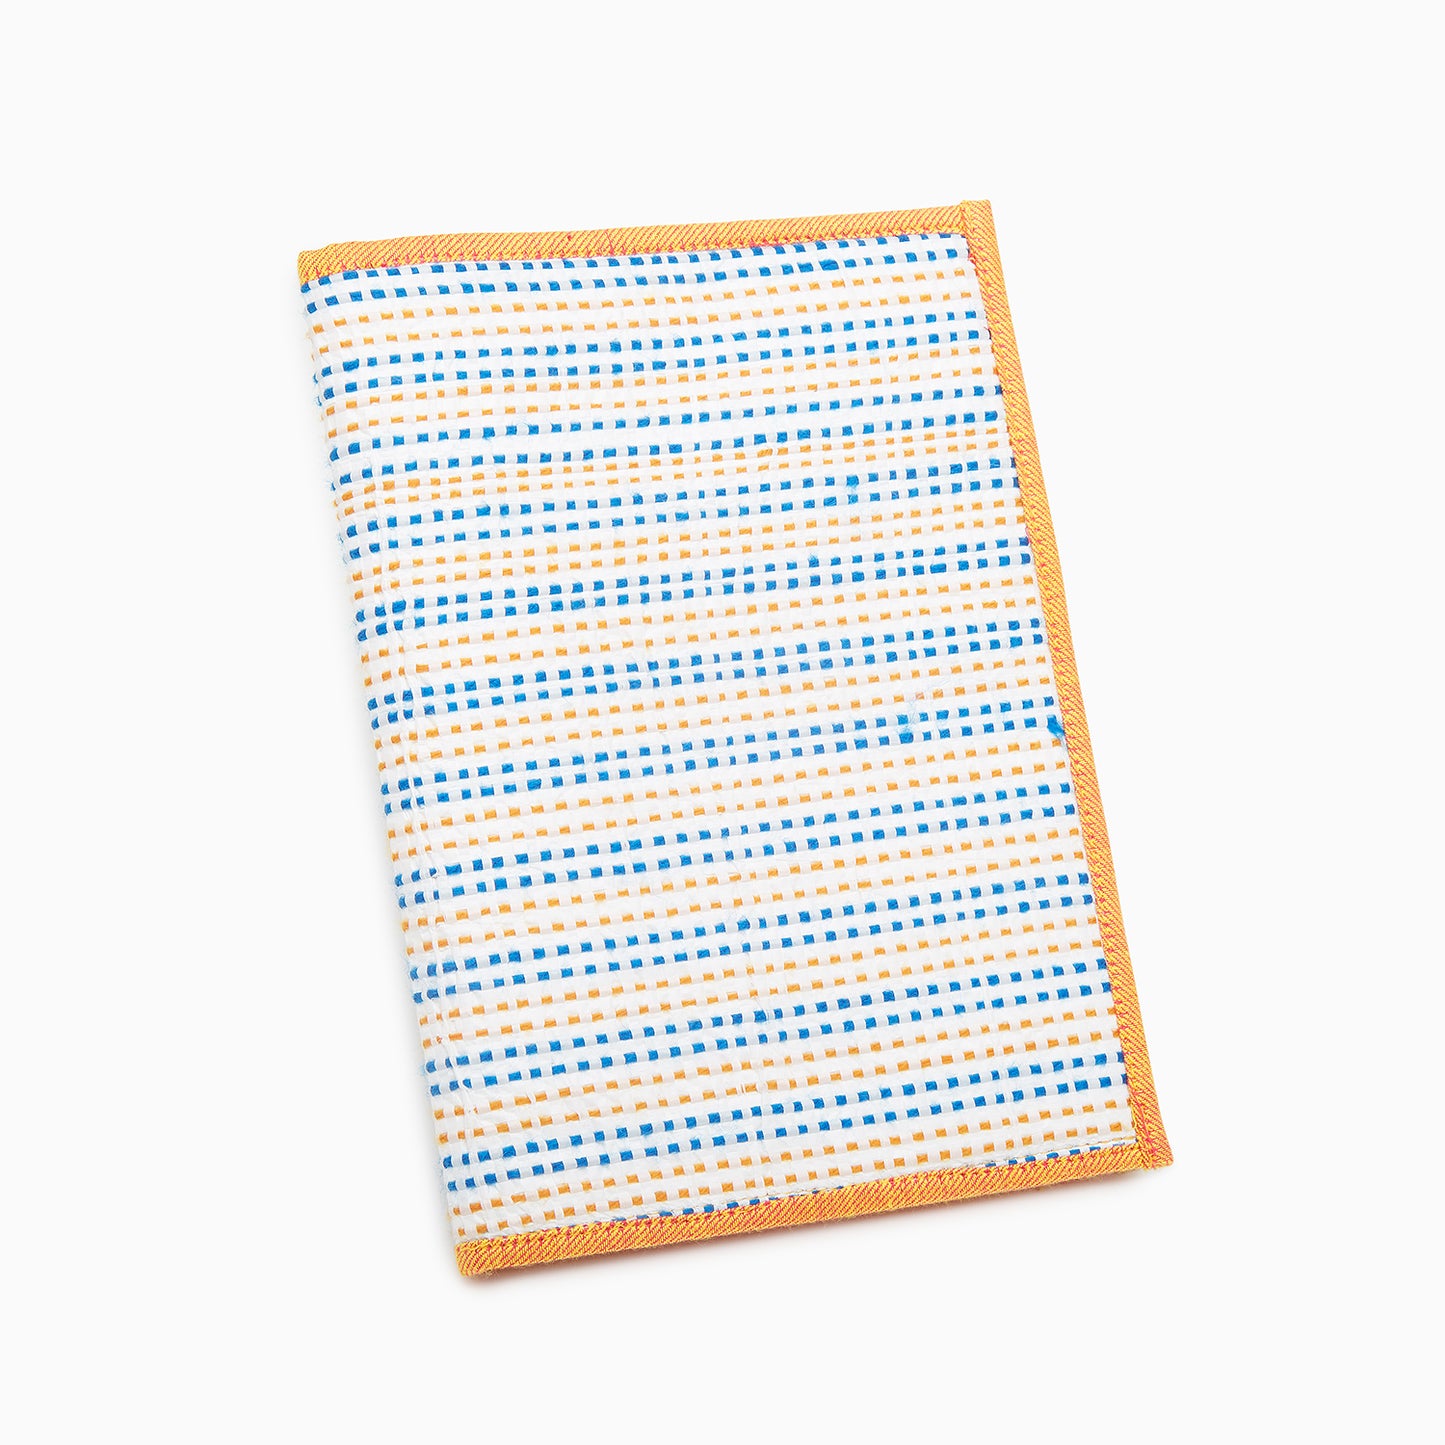 White & Blue and Orange Color design - Sack Cover with Diary